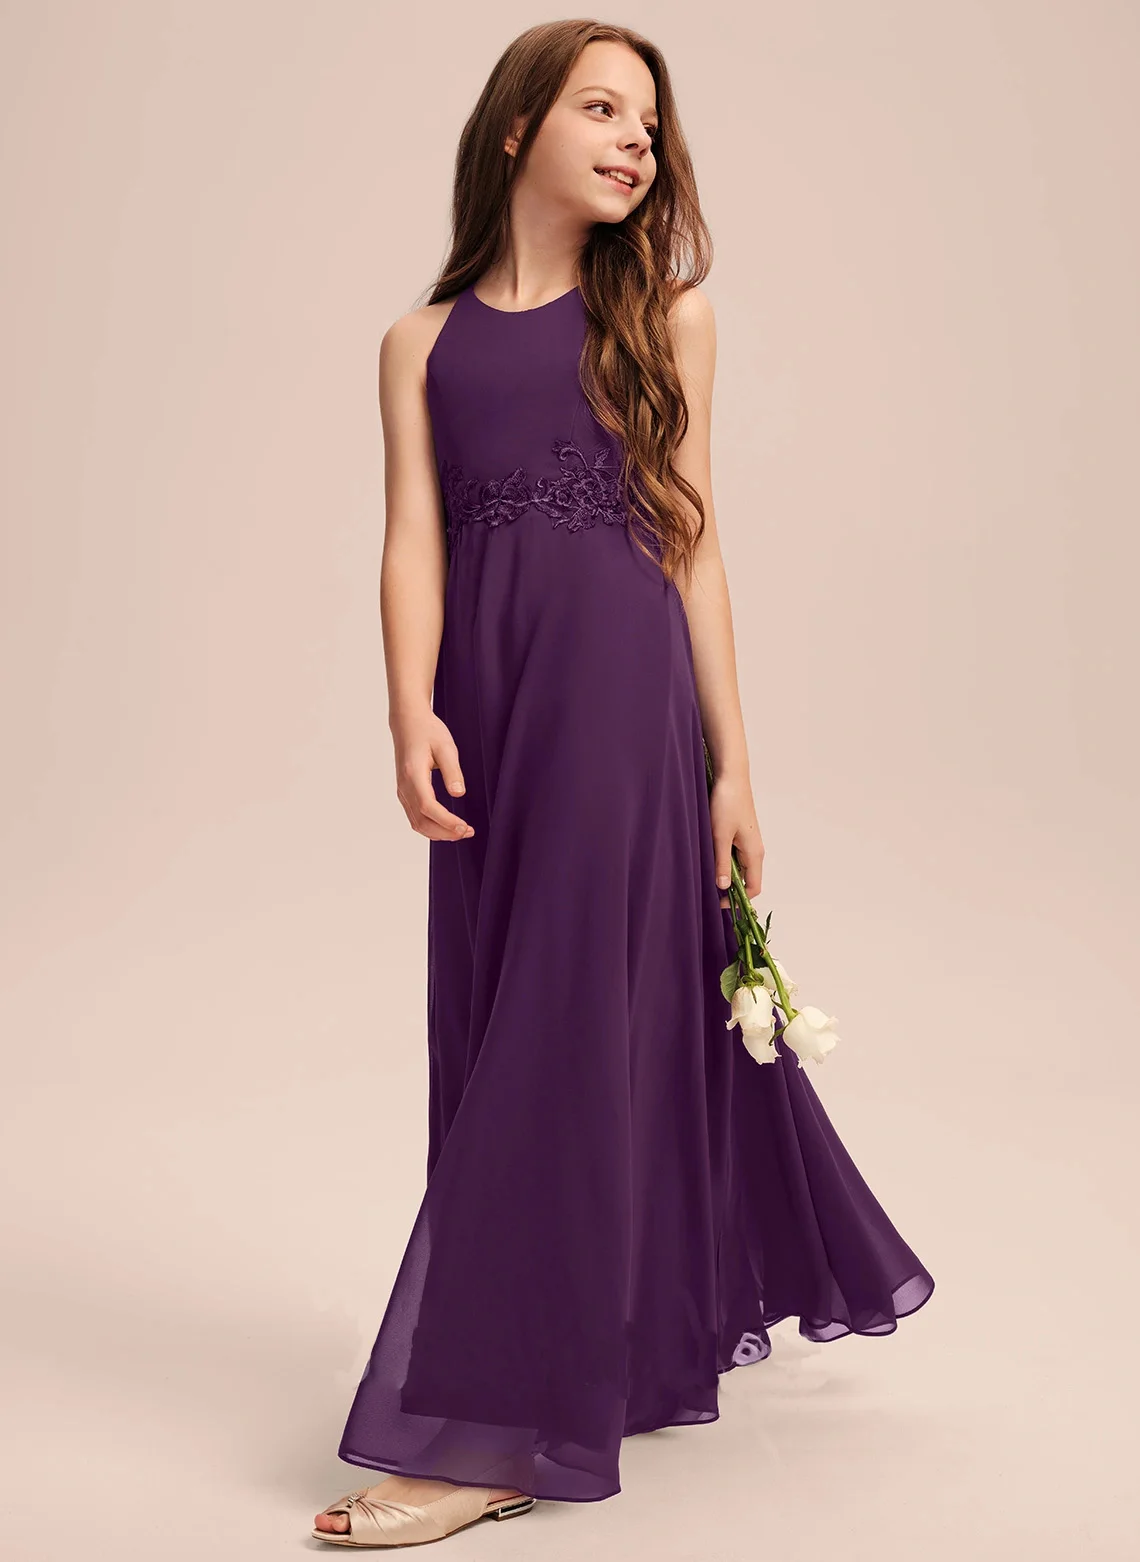 

YZYmanualroom Junior Bridesmaid Dress A Line Scoop Floor Length Chiffon Lace With Pleated Pageant Evening Dresses